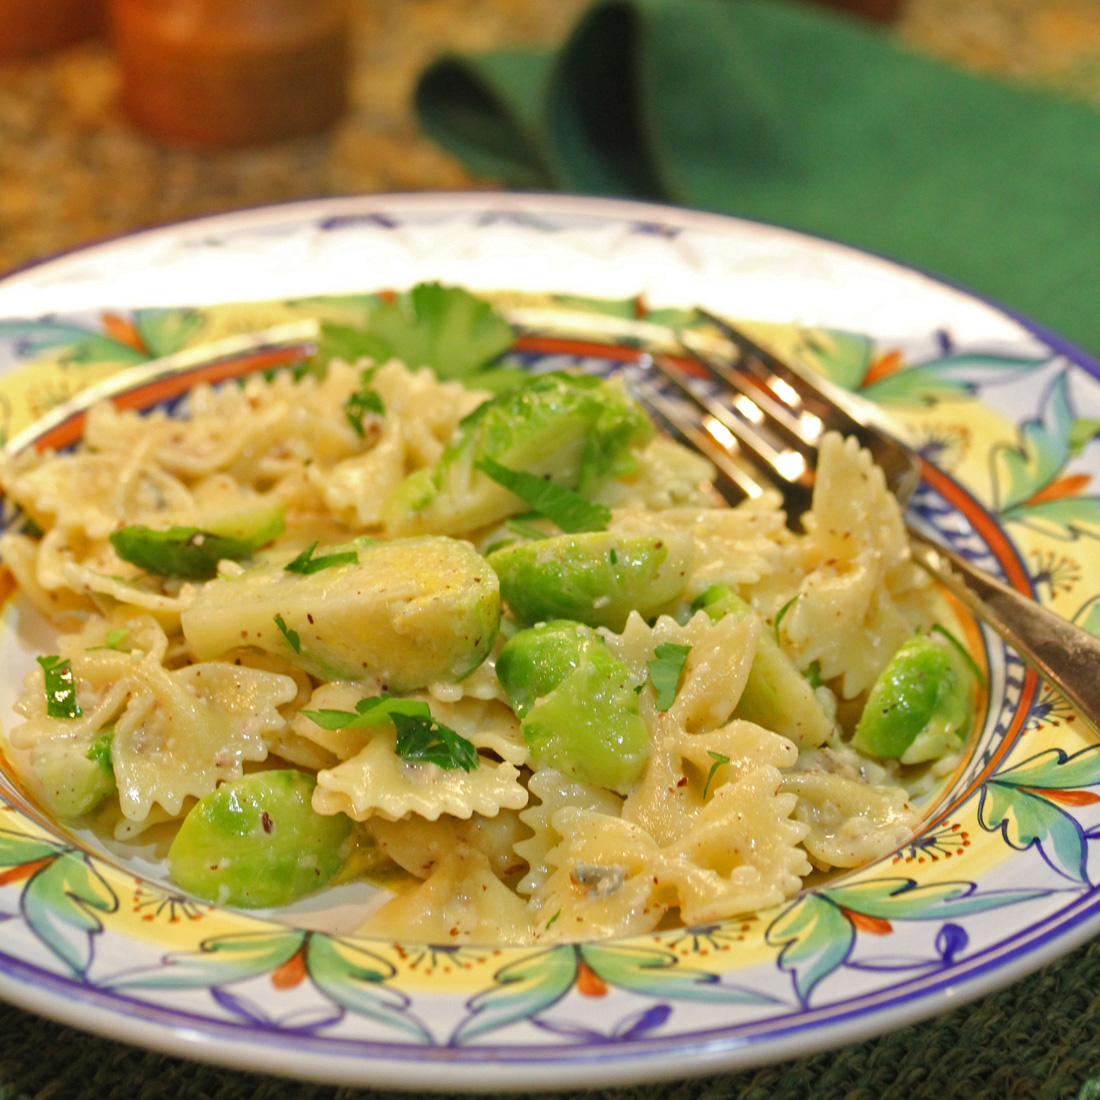 Bow Tie Pasta with Brussels Sprouts, Gorgonzola and Hazelnuts recipe at FreshFoodinaFlash.com